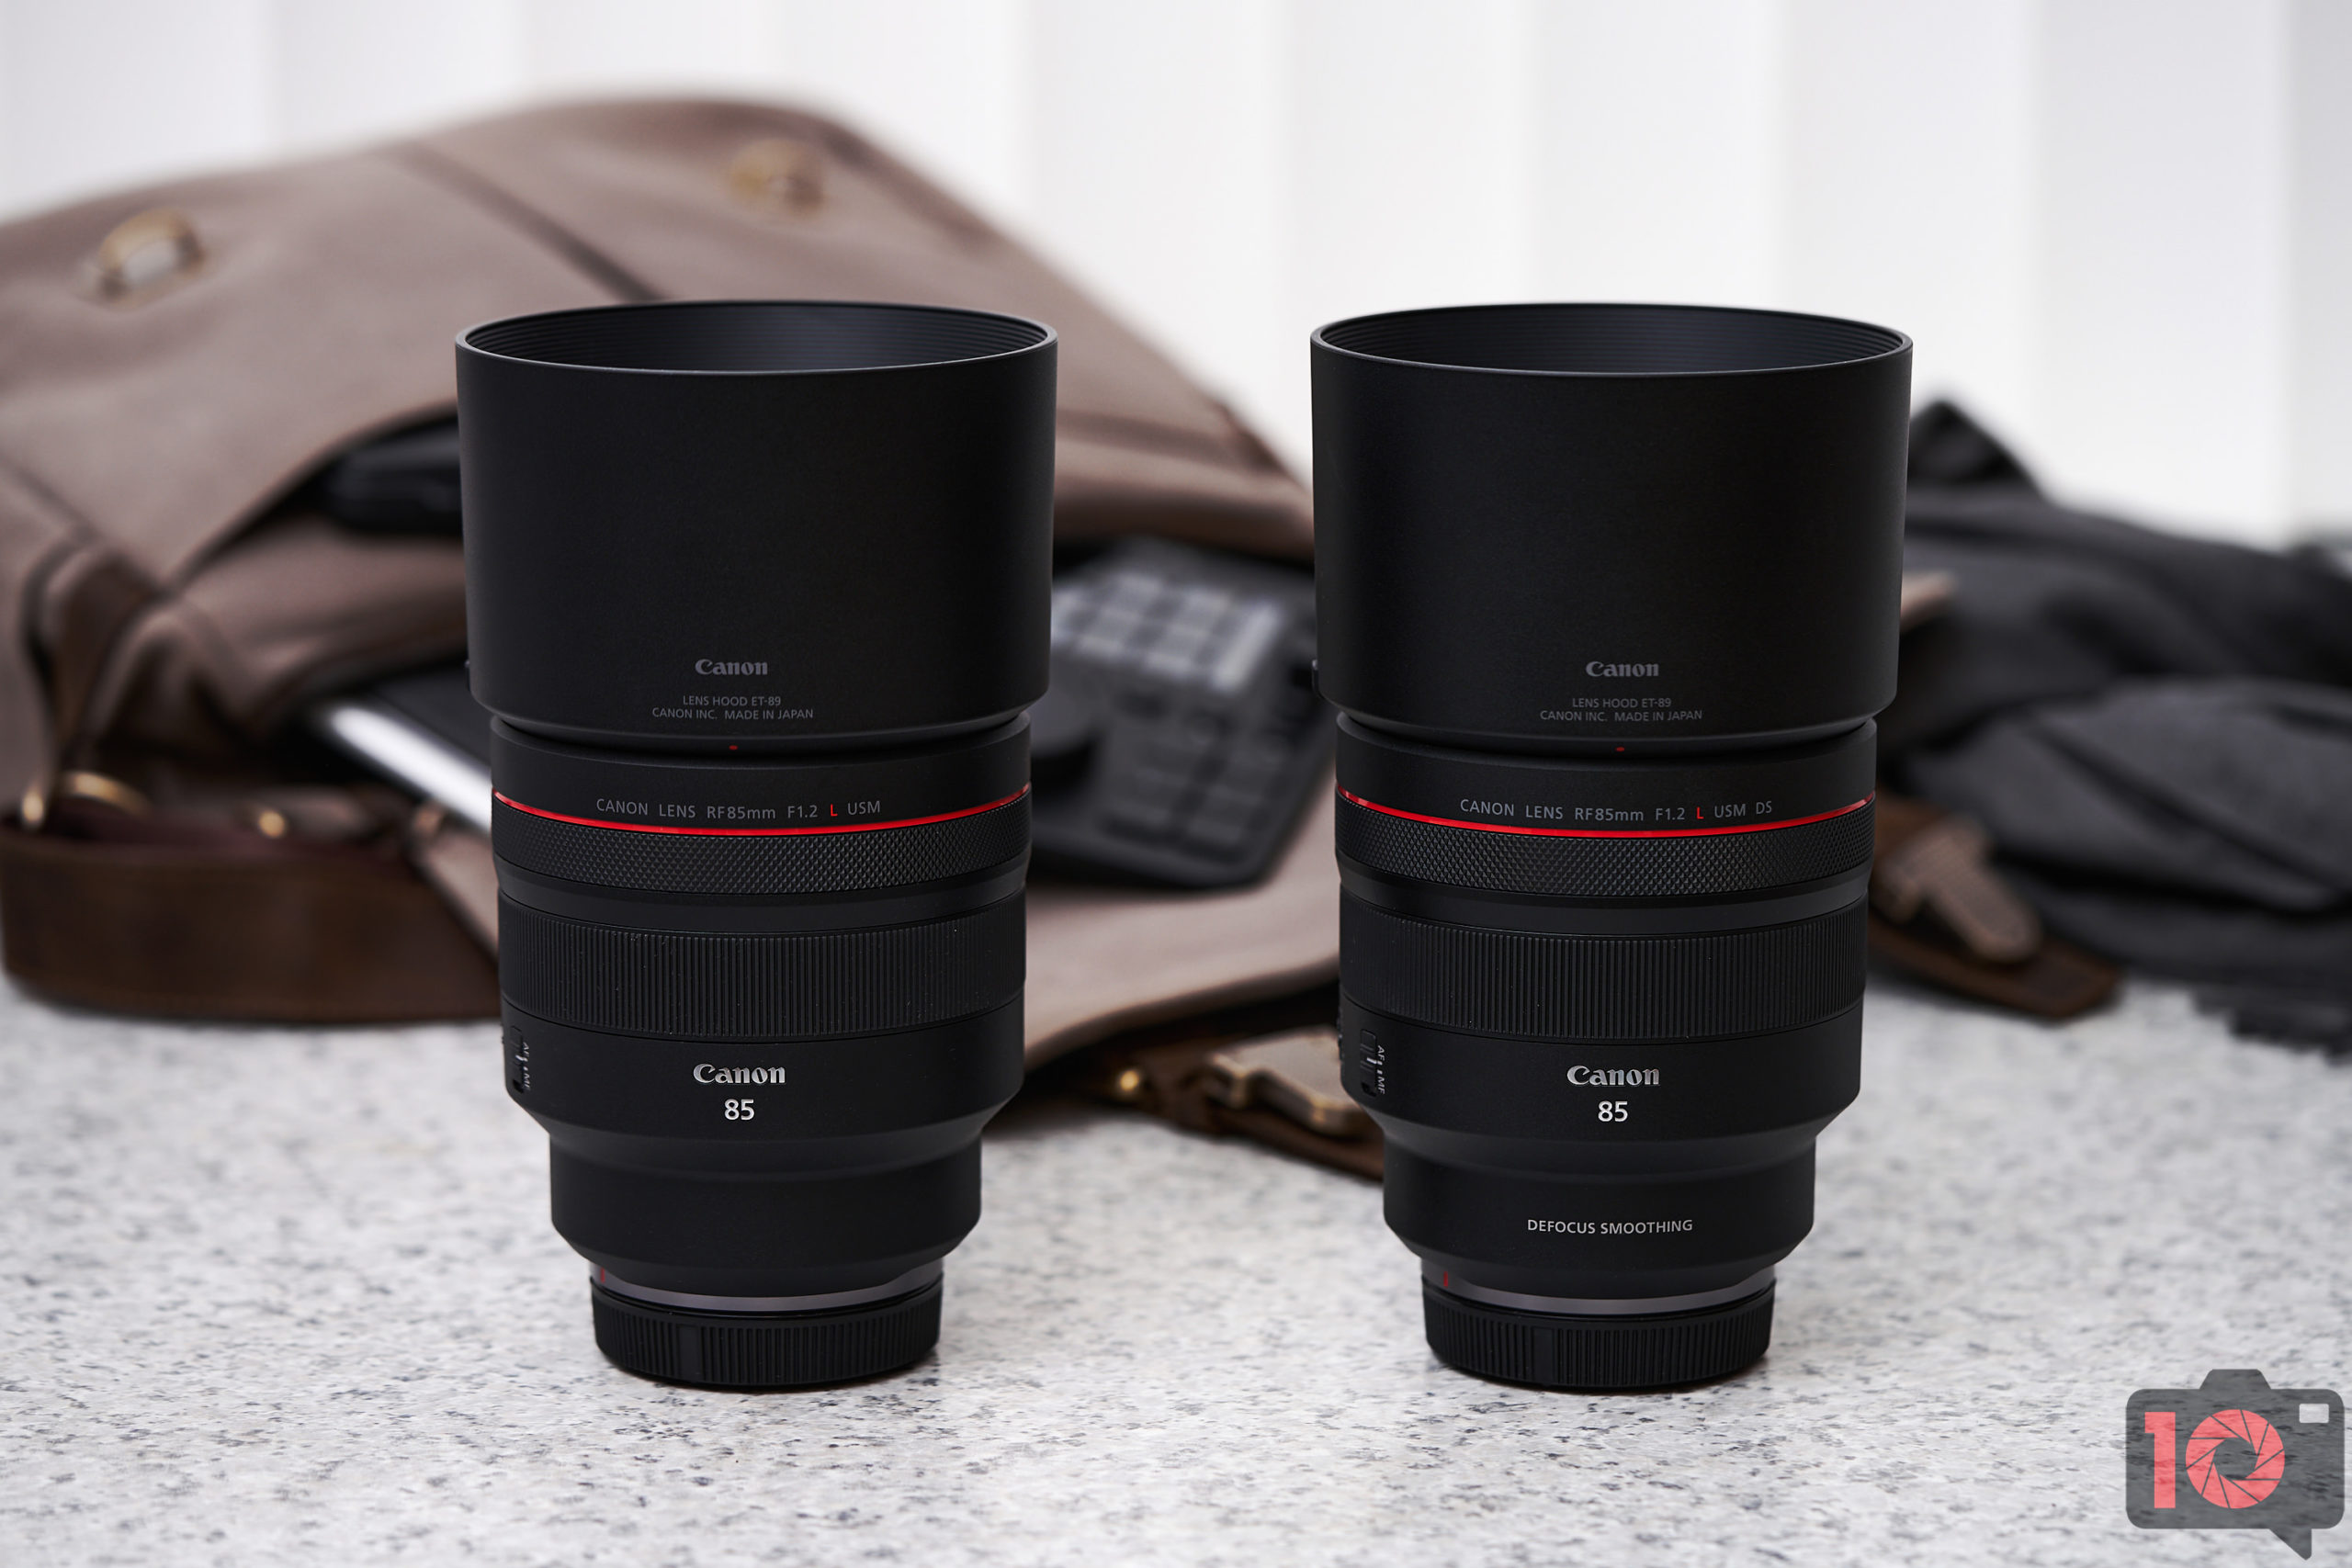 Bokeh For Days! The Canon RF 85mm f1.2 L USM DS Review